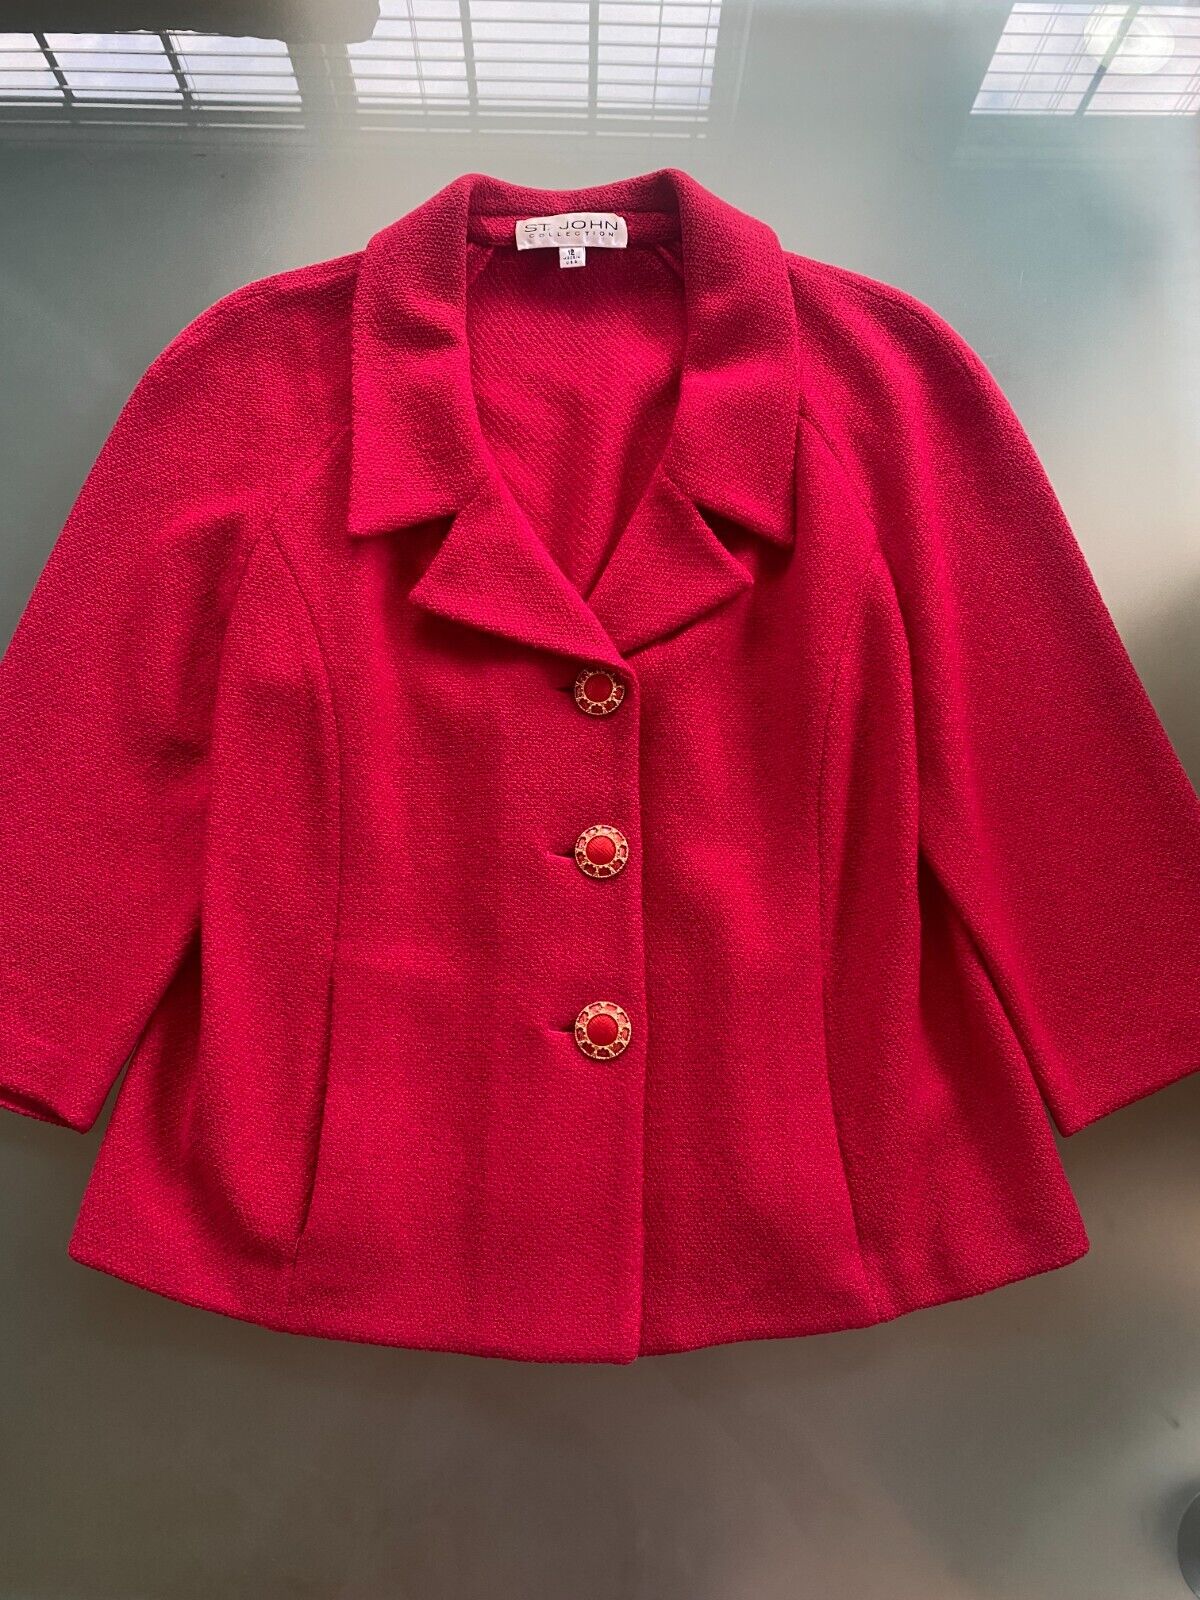 ST JOHN COLLECTION Bright Red Cropped Jacket Size 12